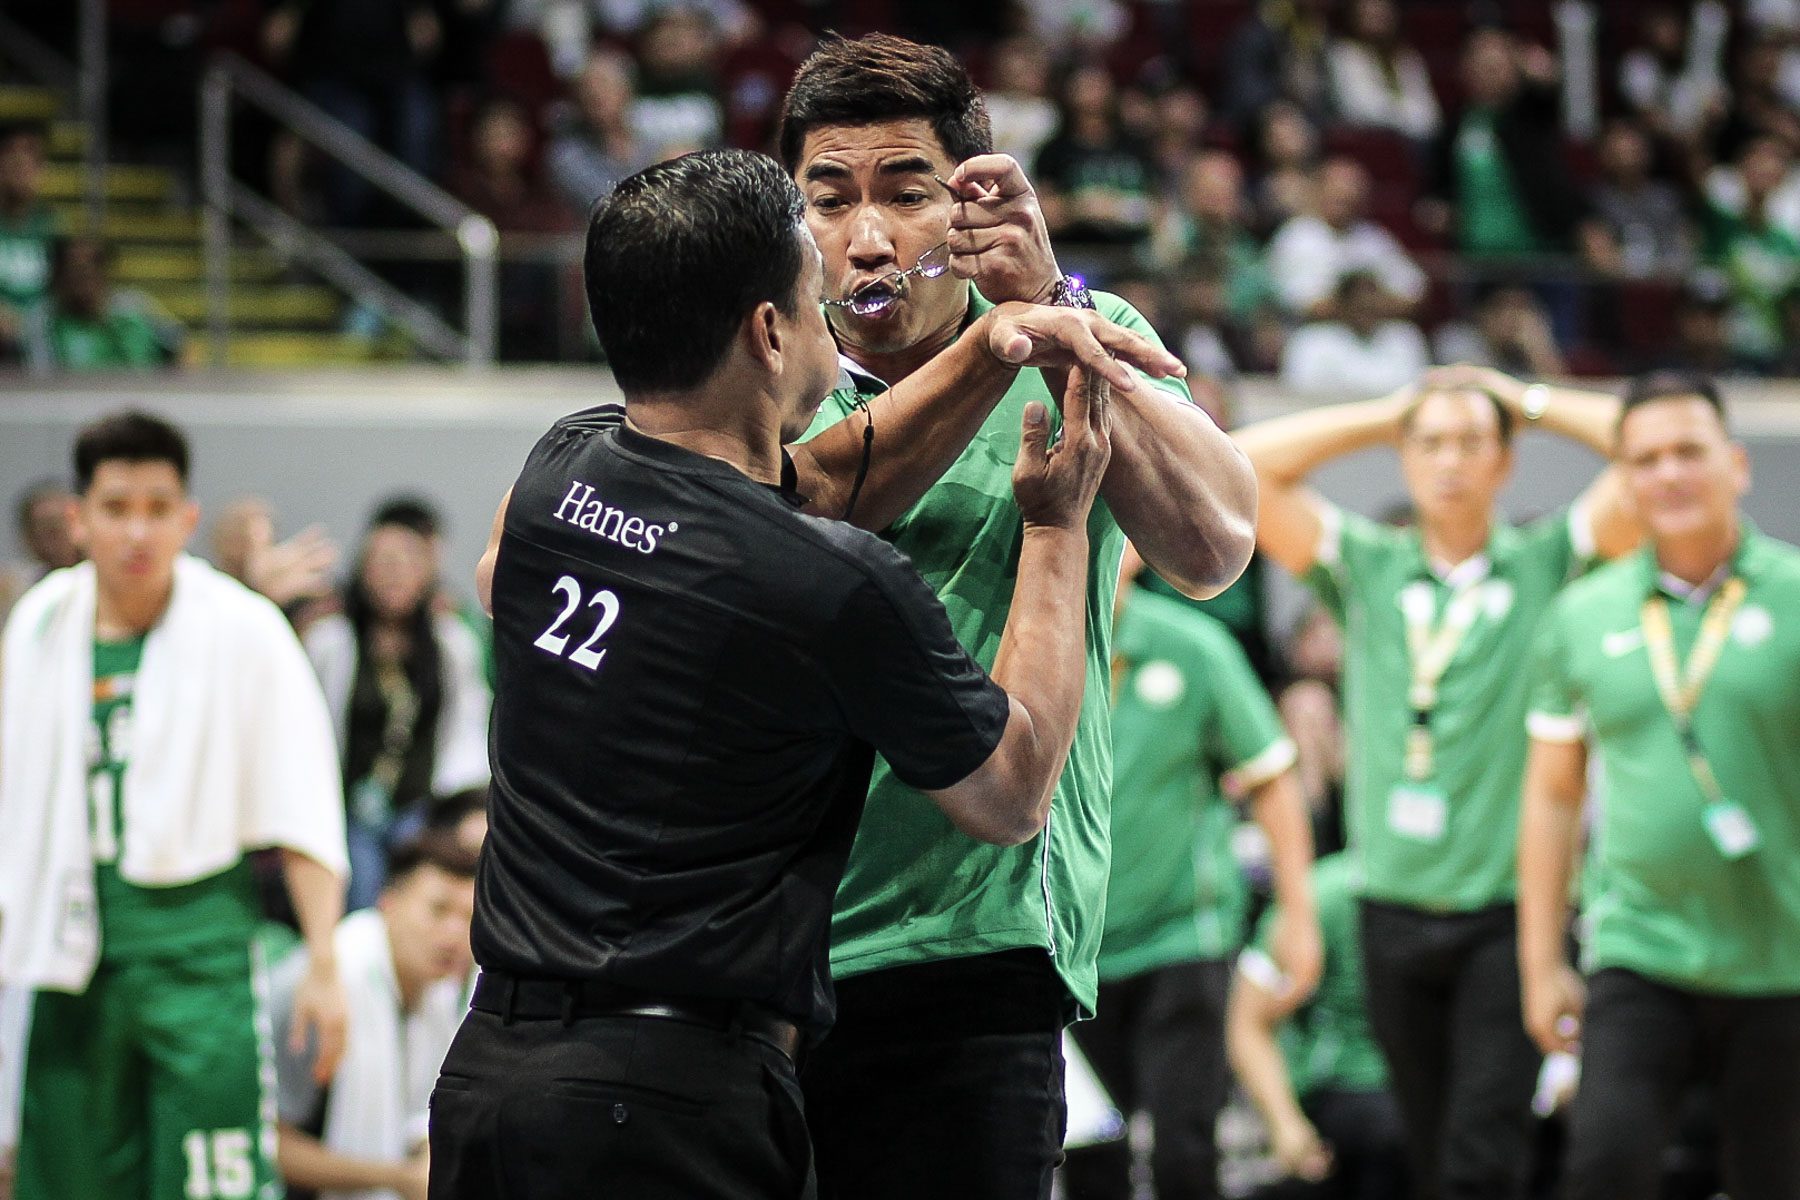 UAAP denies La Salle’s appeal to lift Ayo’s suspension